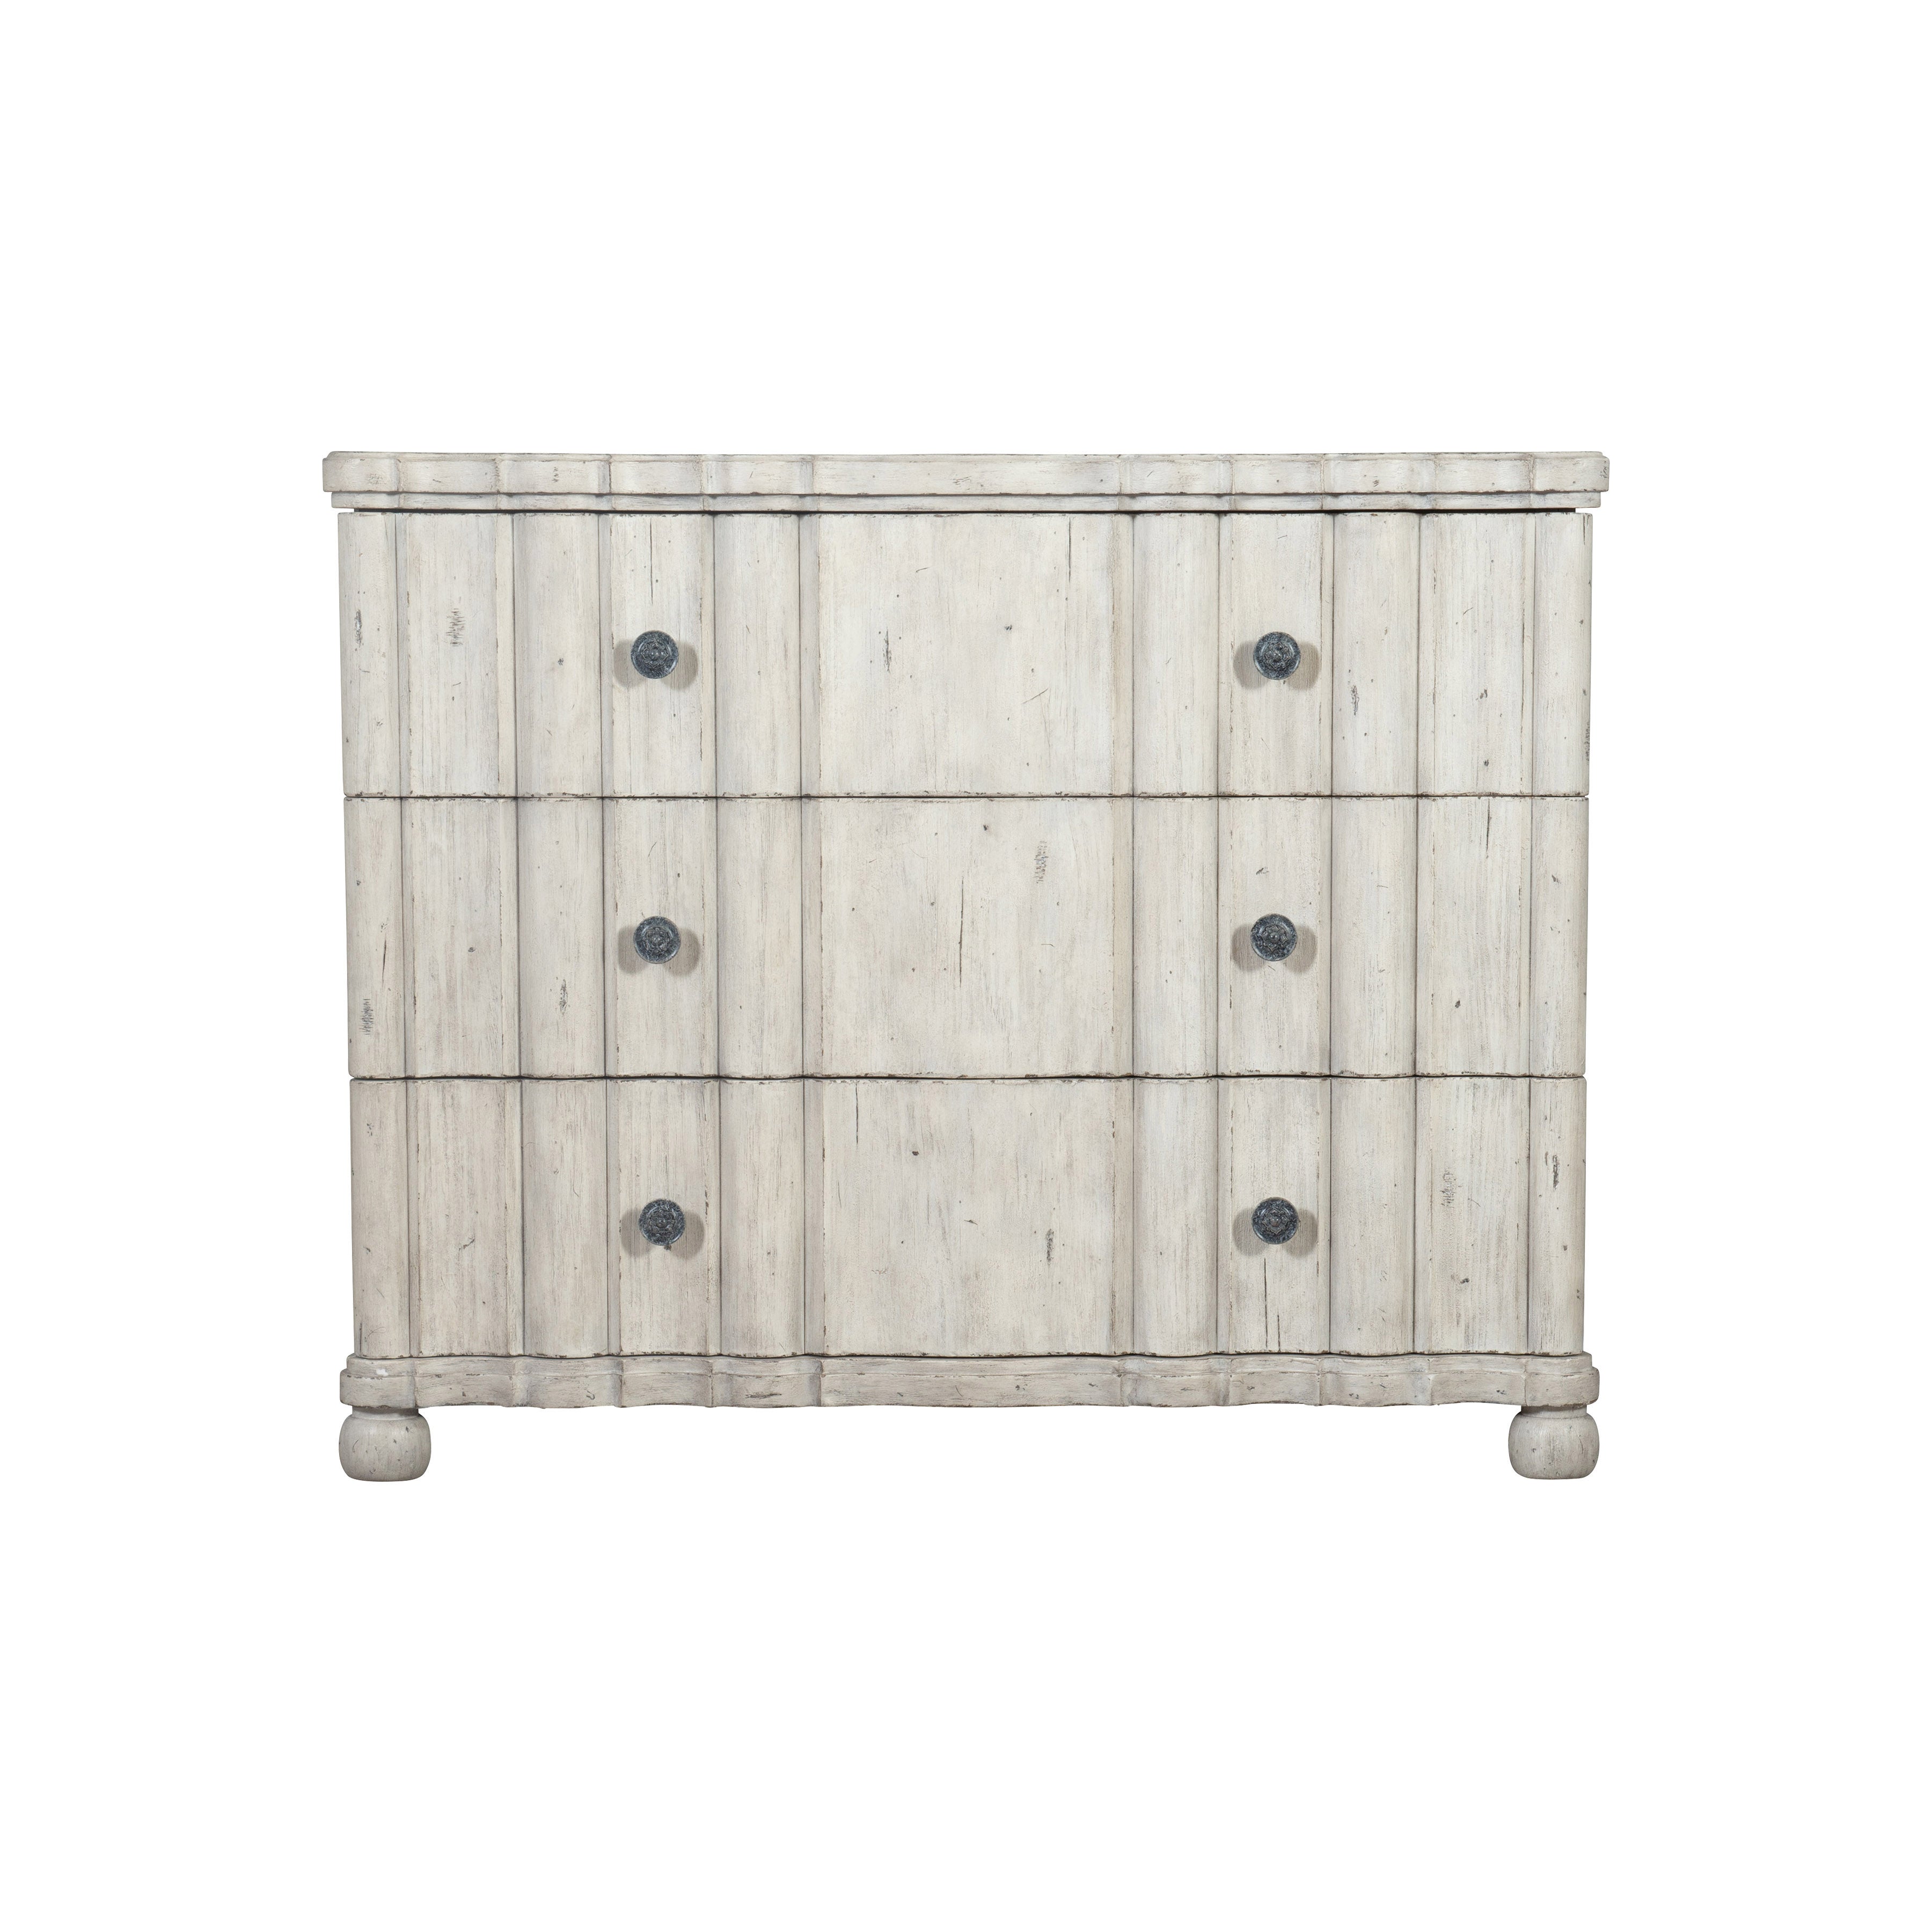 Mirabelle Bachelor's Chest in Cotton